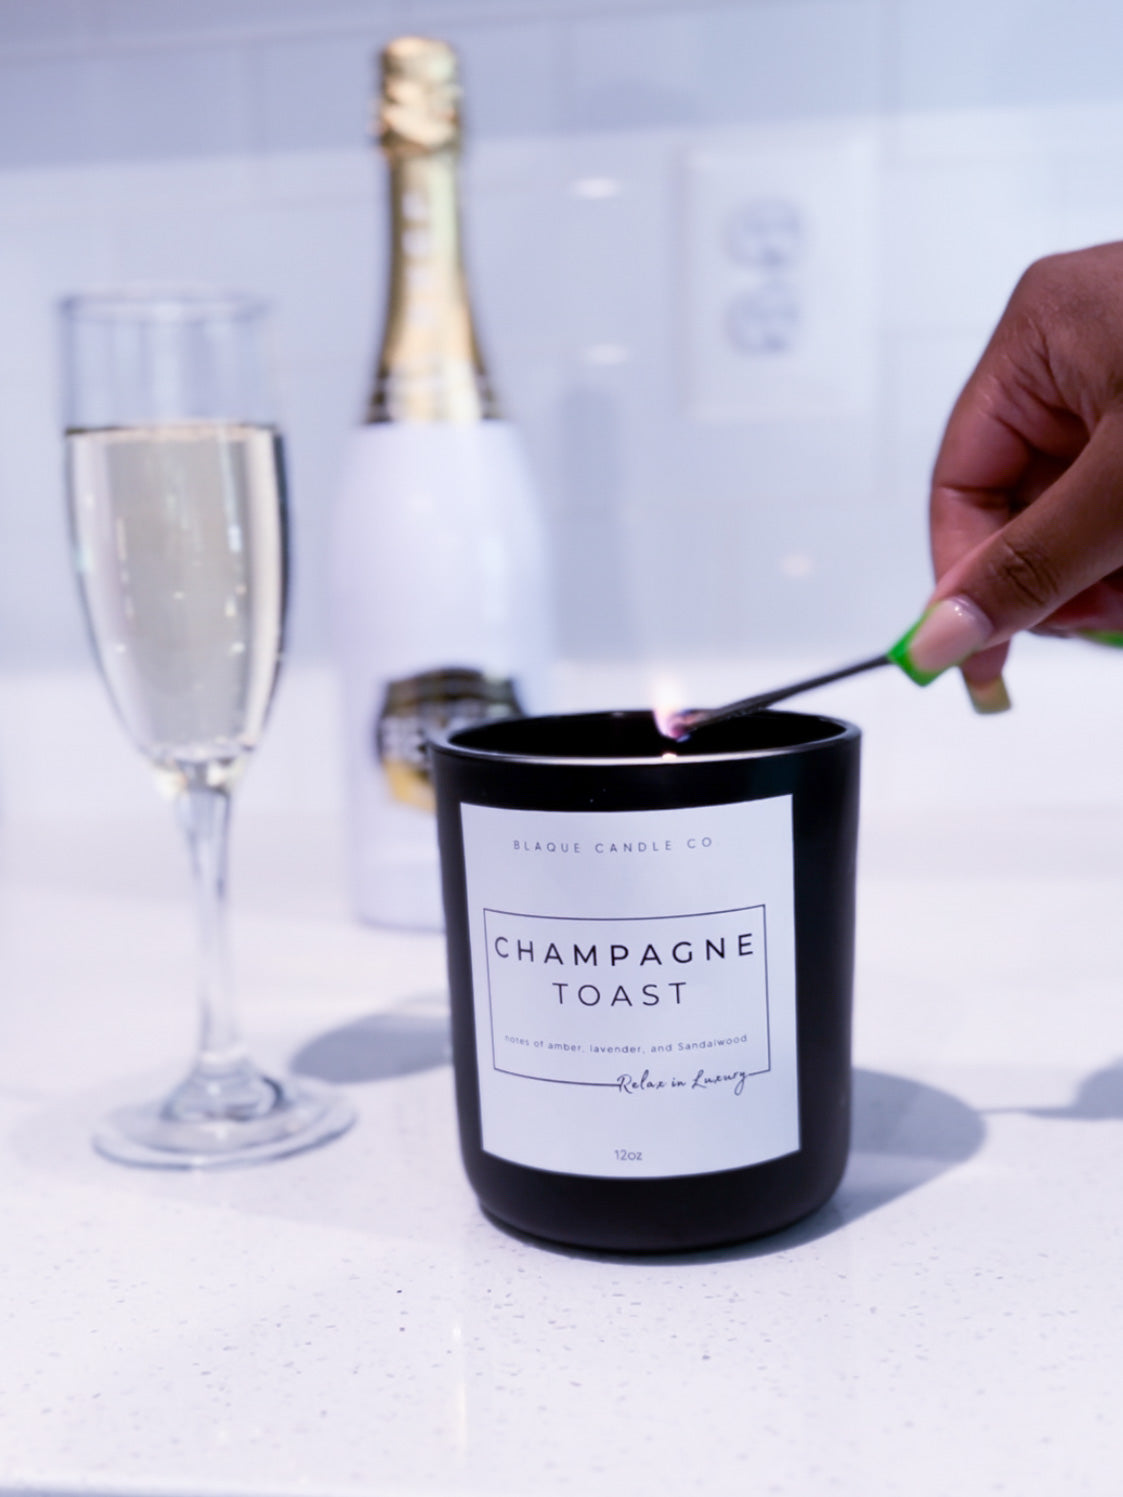 LIMITED EDITION: Champagne Toast – BLAQUE CANDLE CO